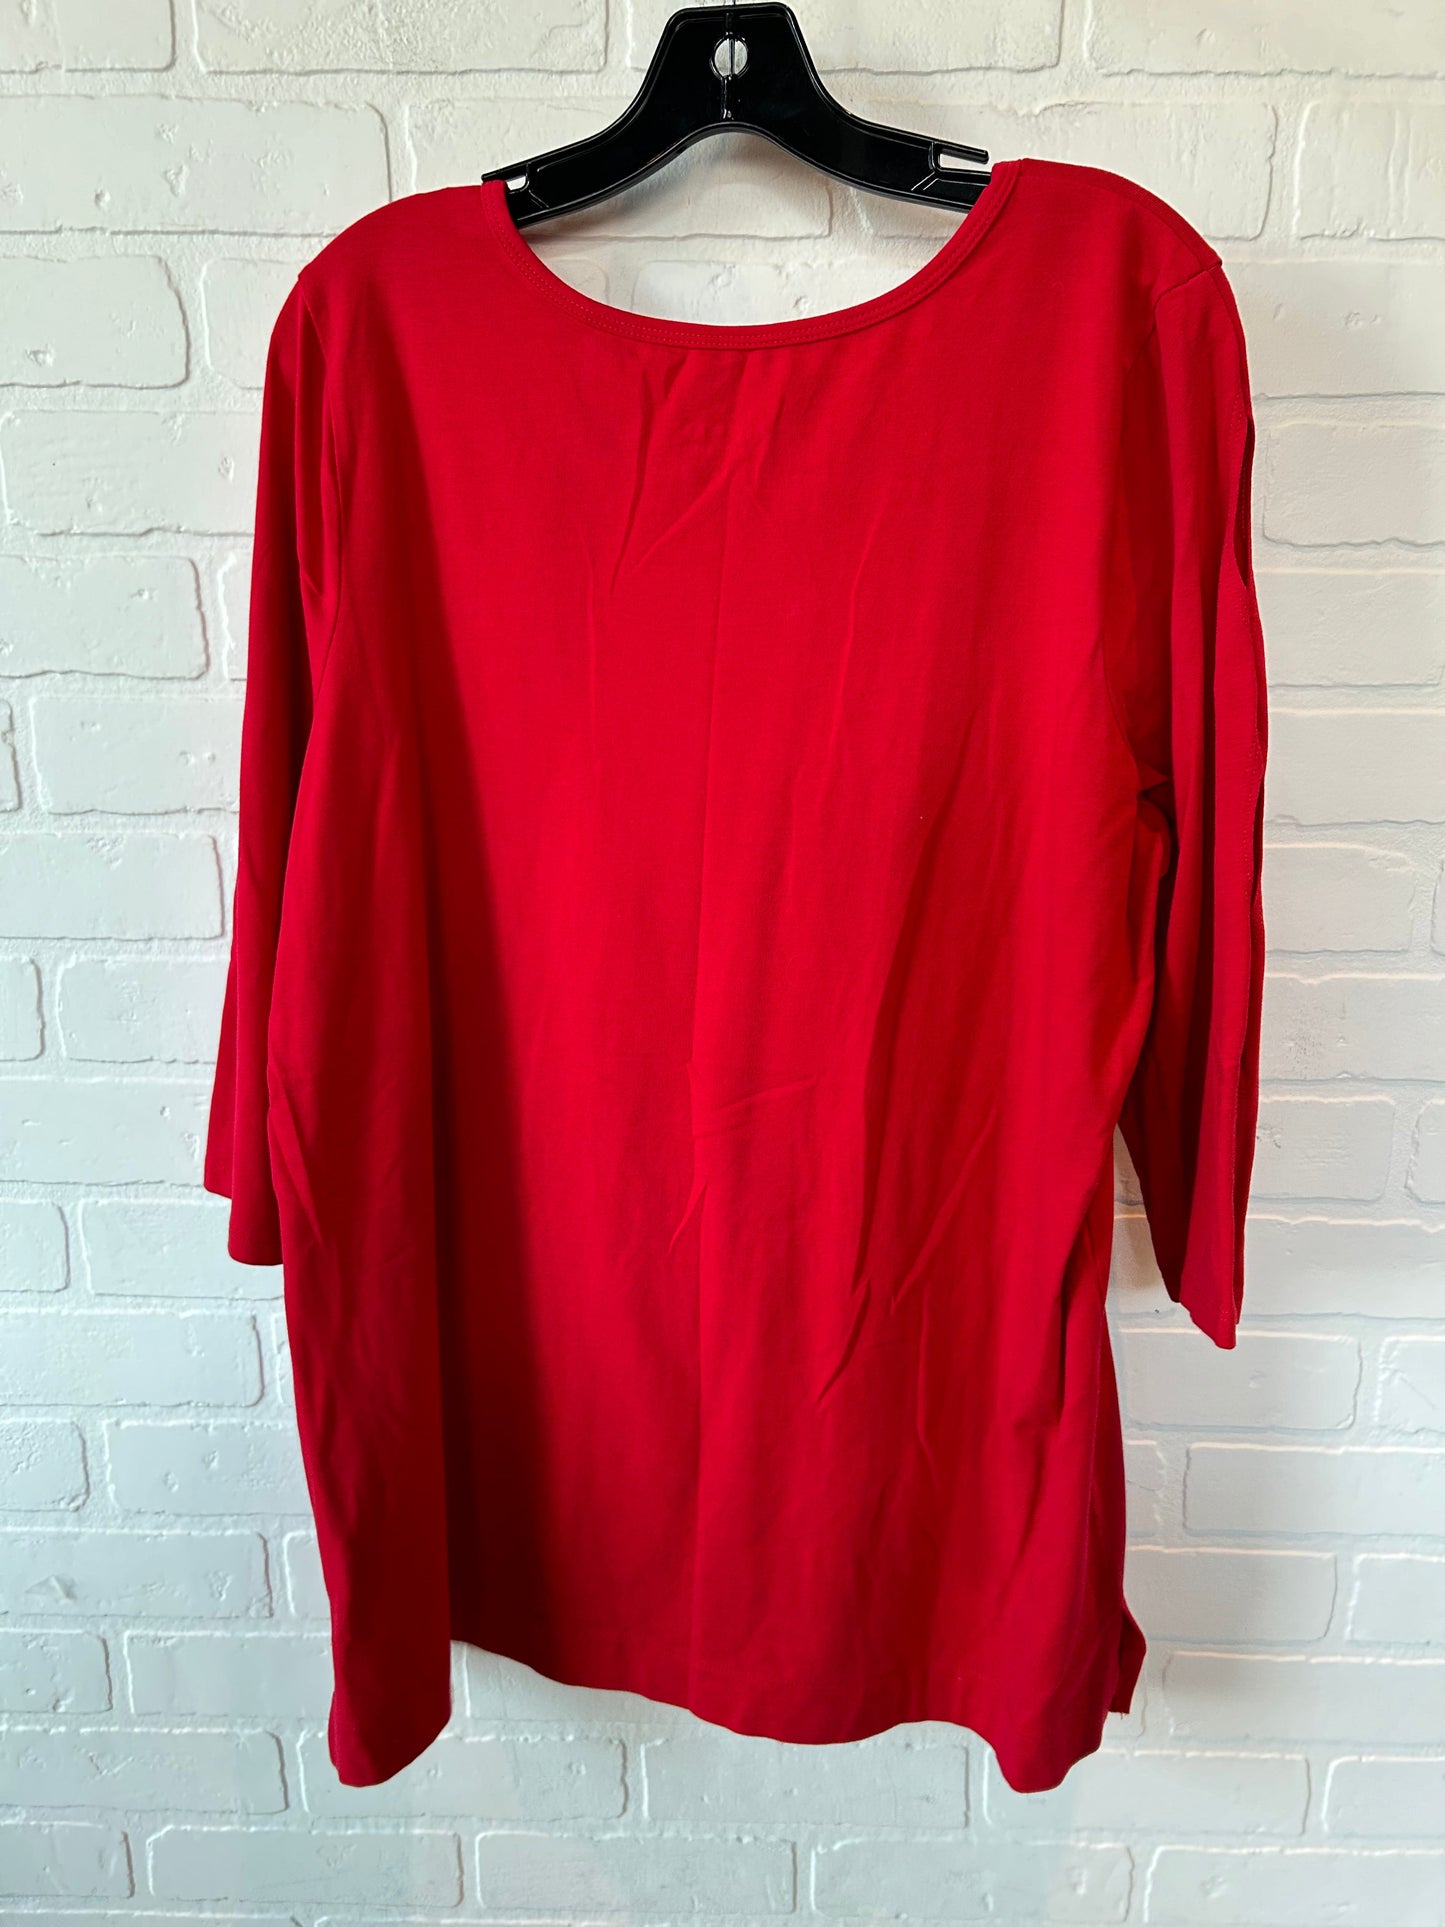 Red Top 3/4 Sleeve Basic Denim And Company, Size L